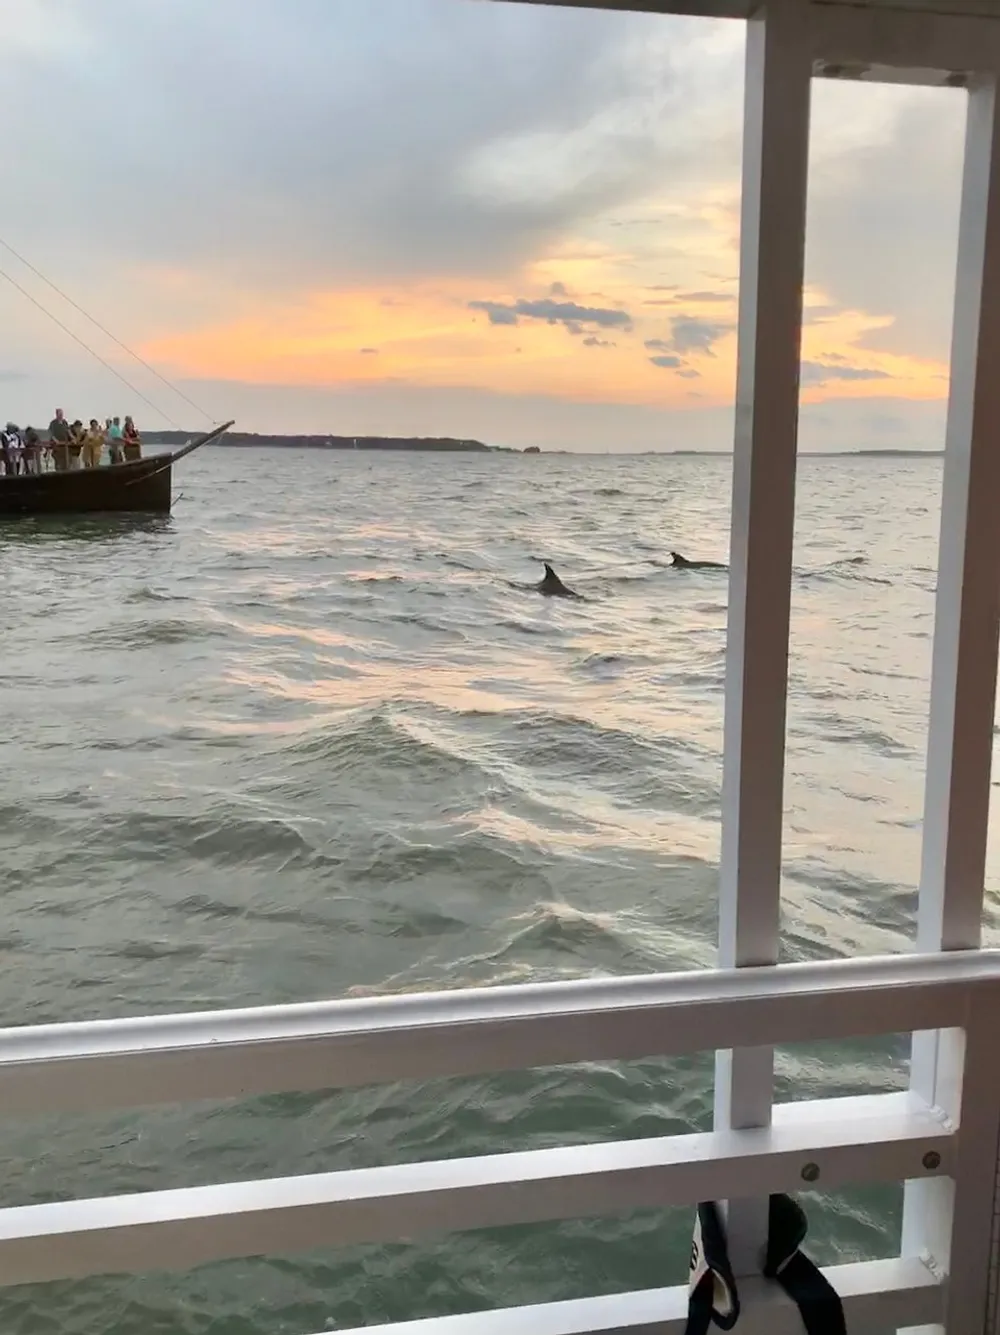 A dolphin is swimming near a group of people on a boat at sunset as viewed from a window with a white railing